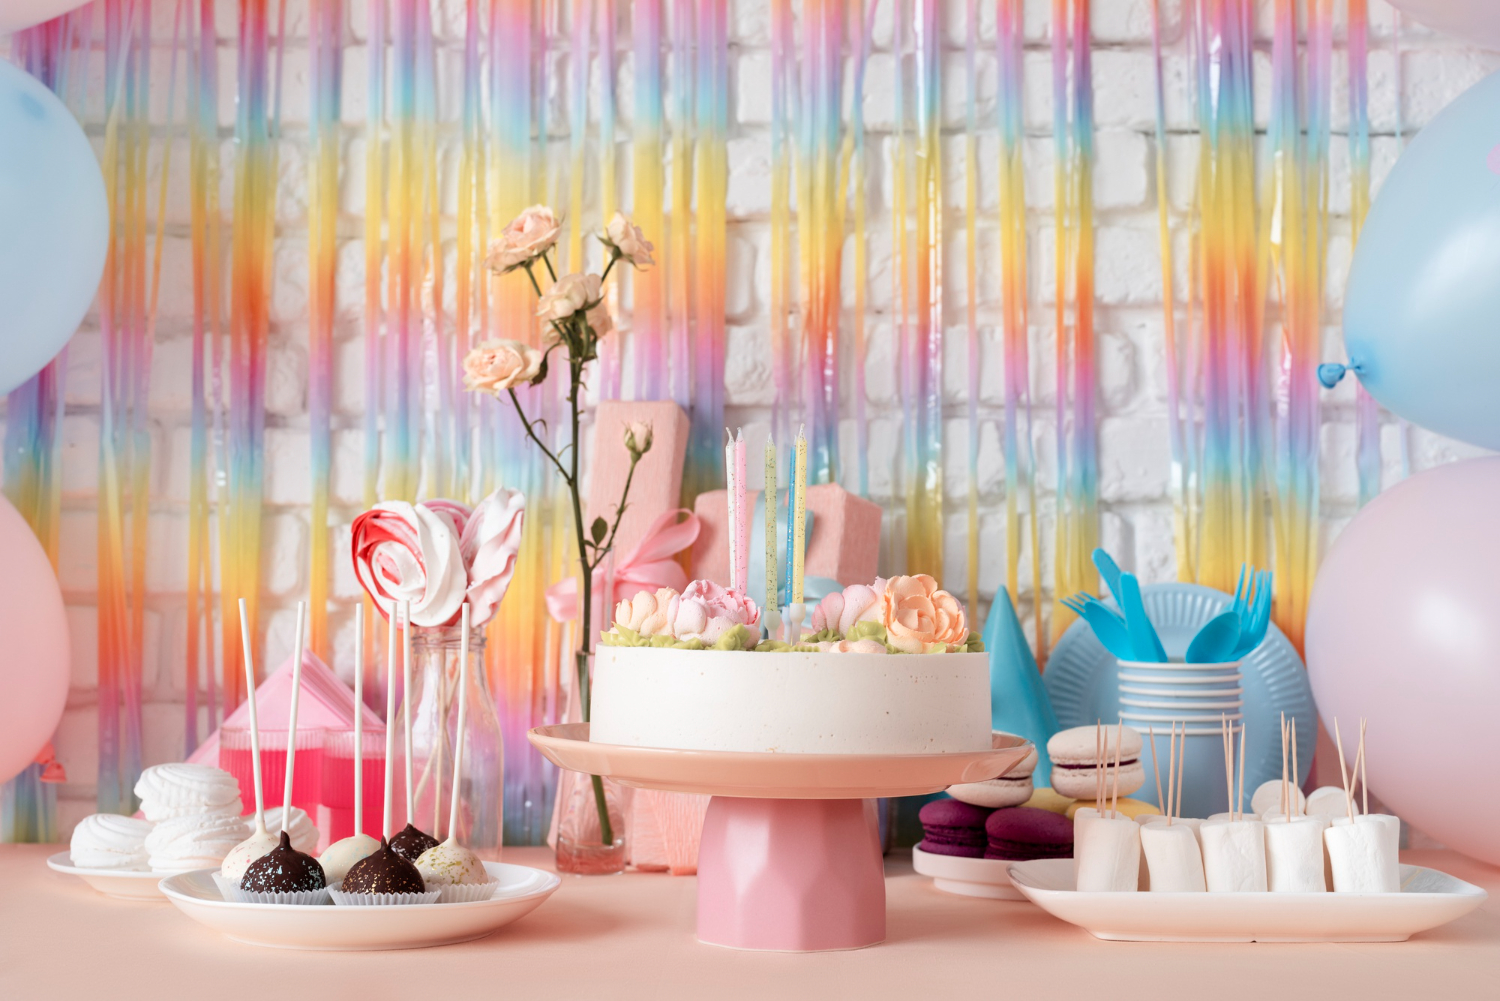 Celebrate in style with our Desert Rose Baby Shower Ideas! This colorful image features balloons, cake, and candy for a festive birthday party